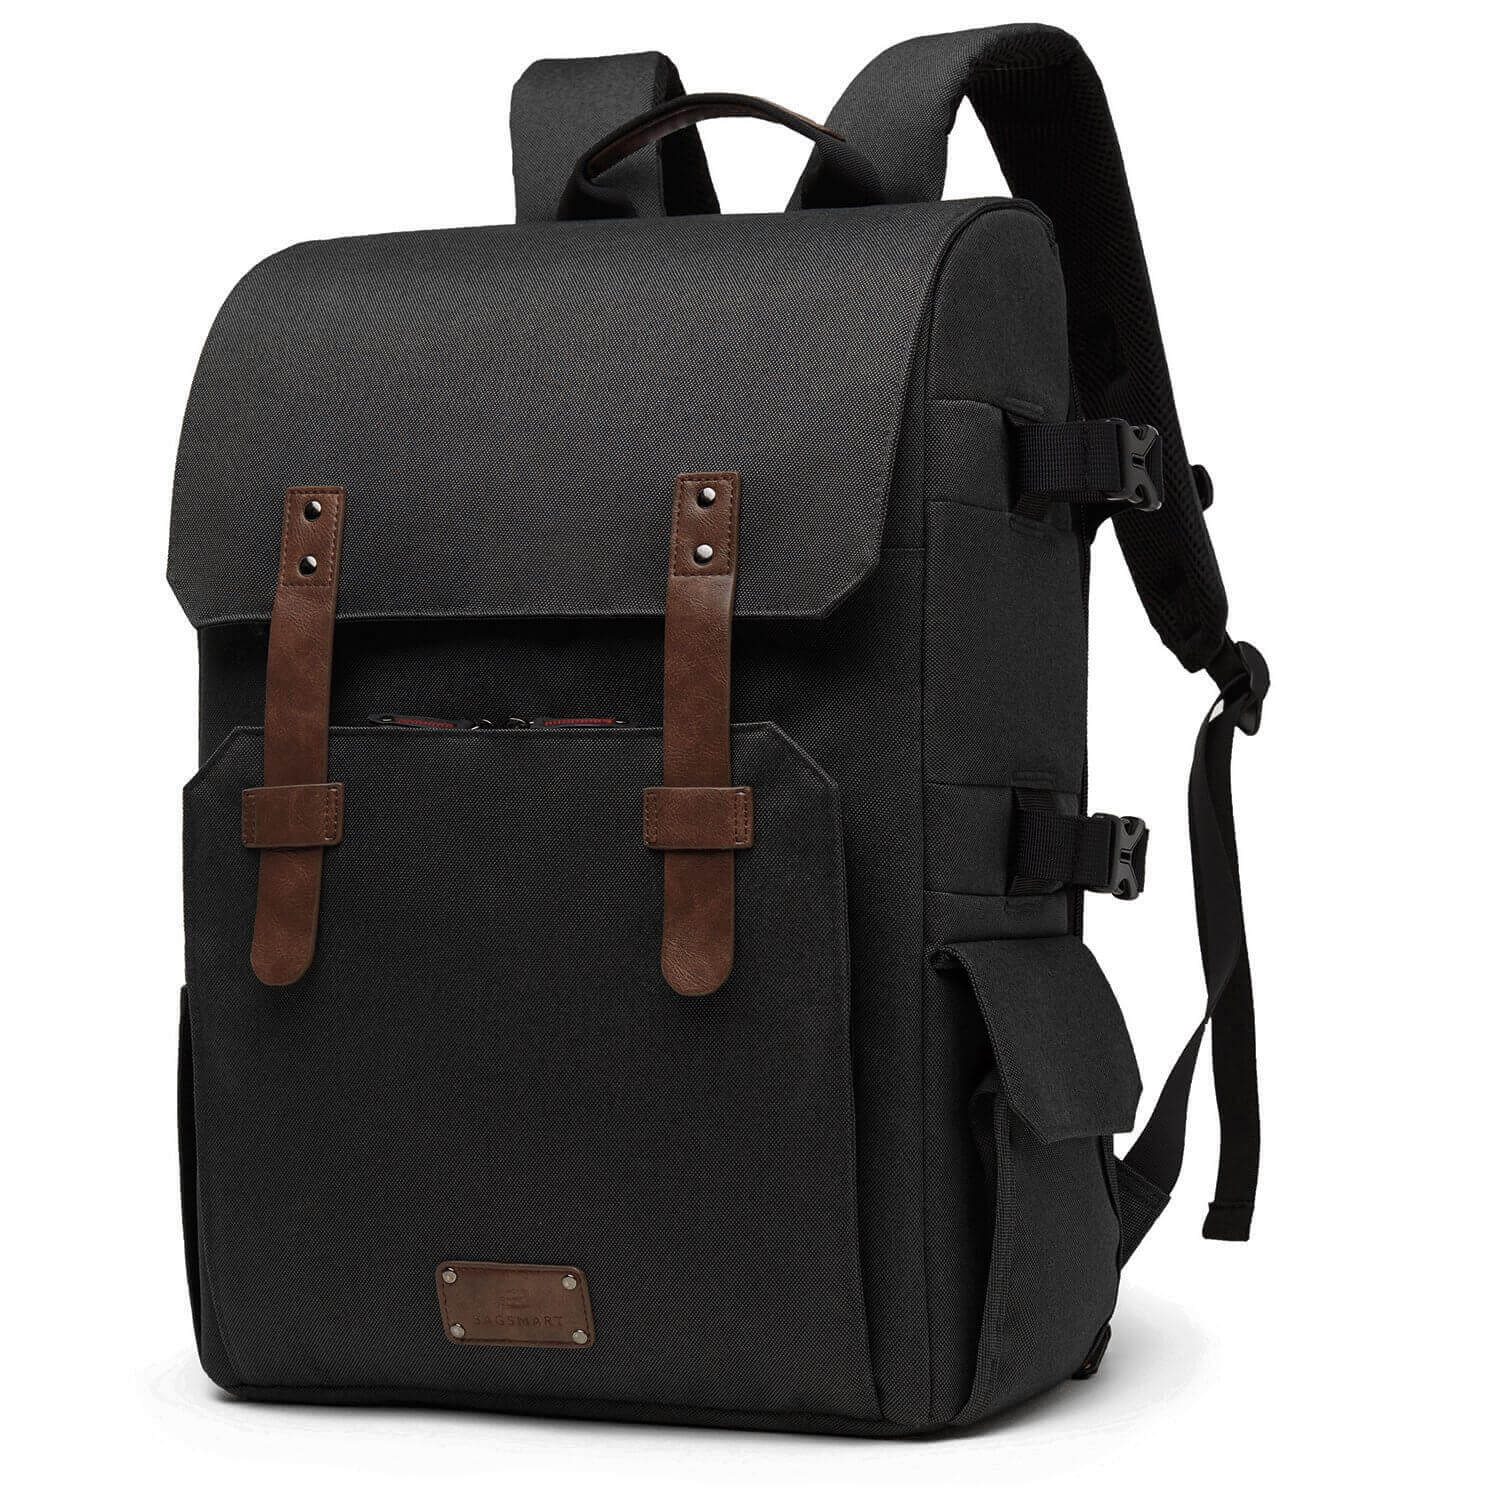 8 Best Camera Backpacks for Airline Travel (Reviews 2020) | CameraIO